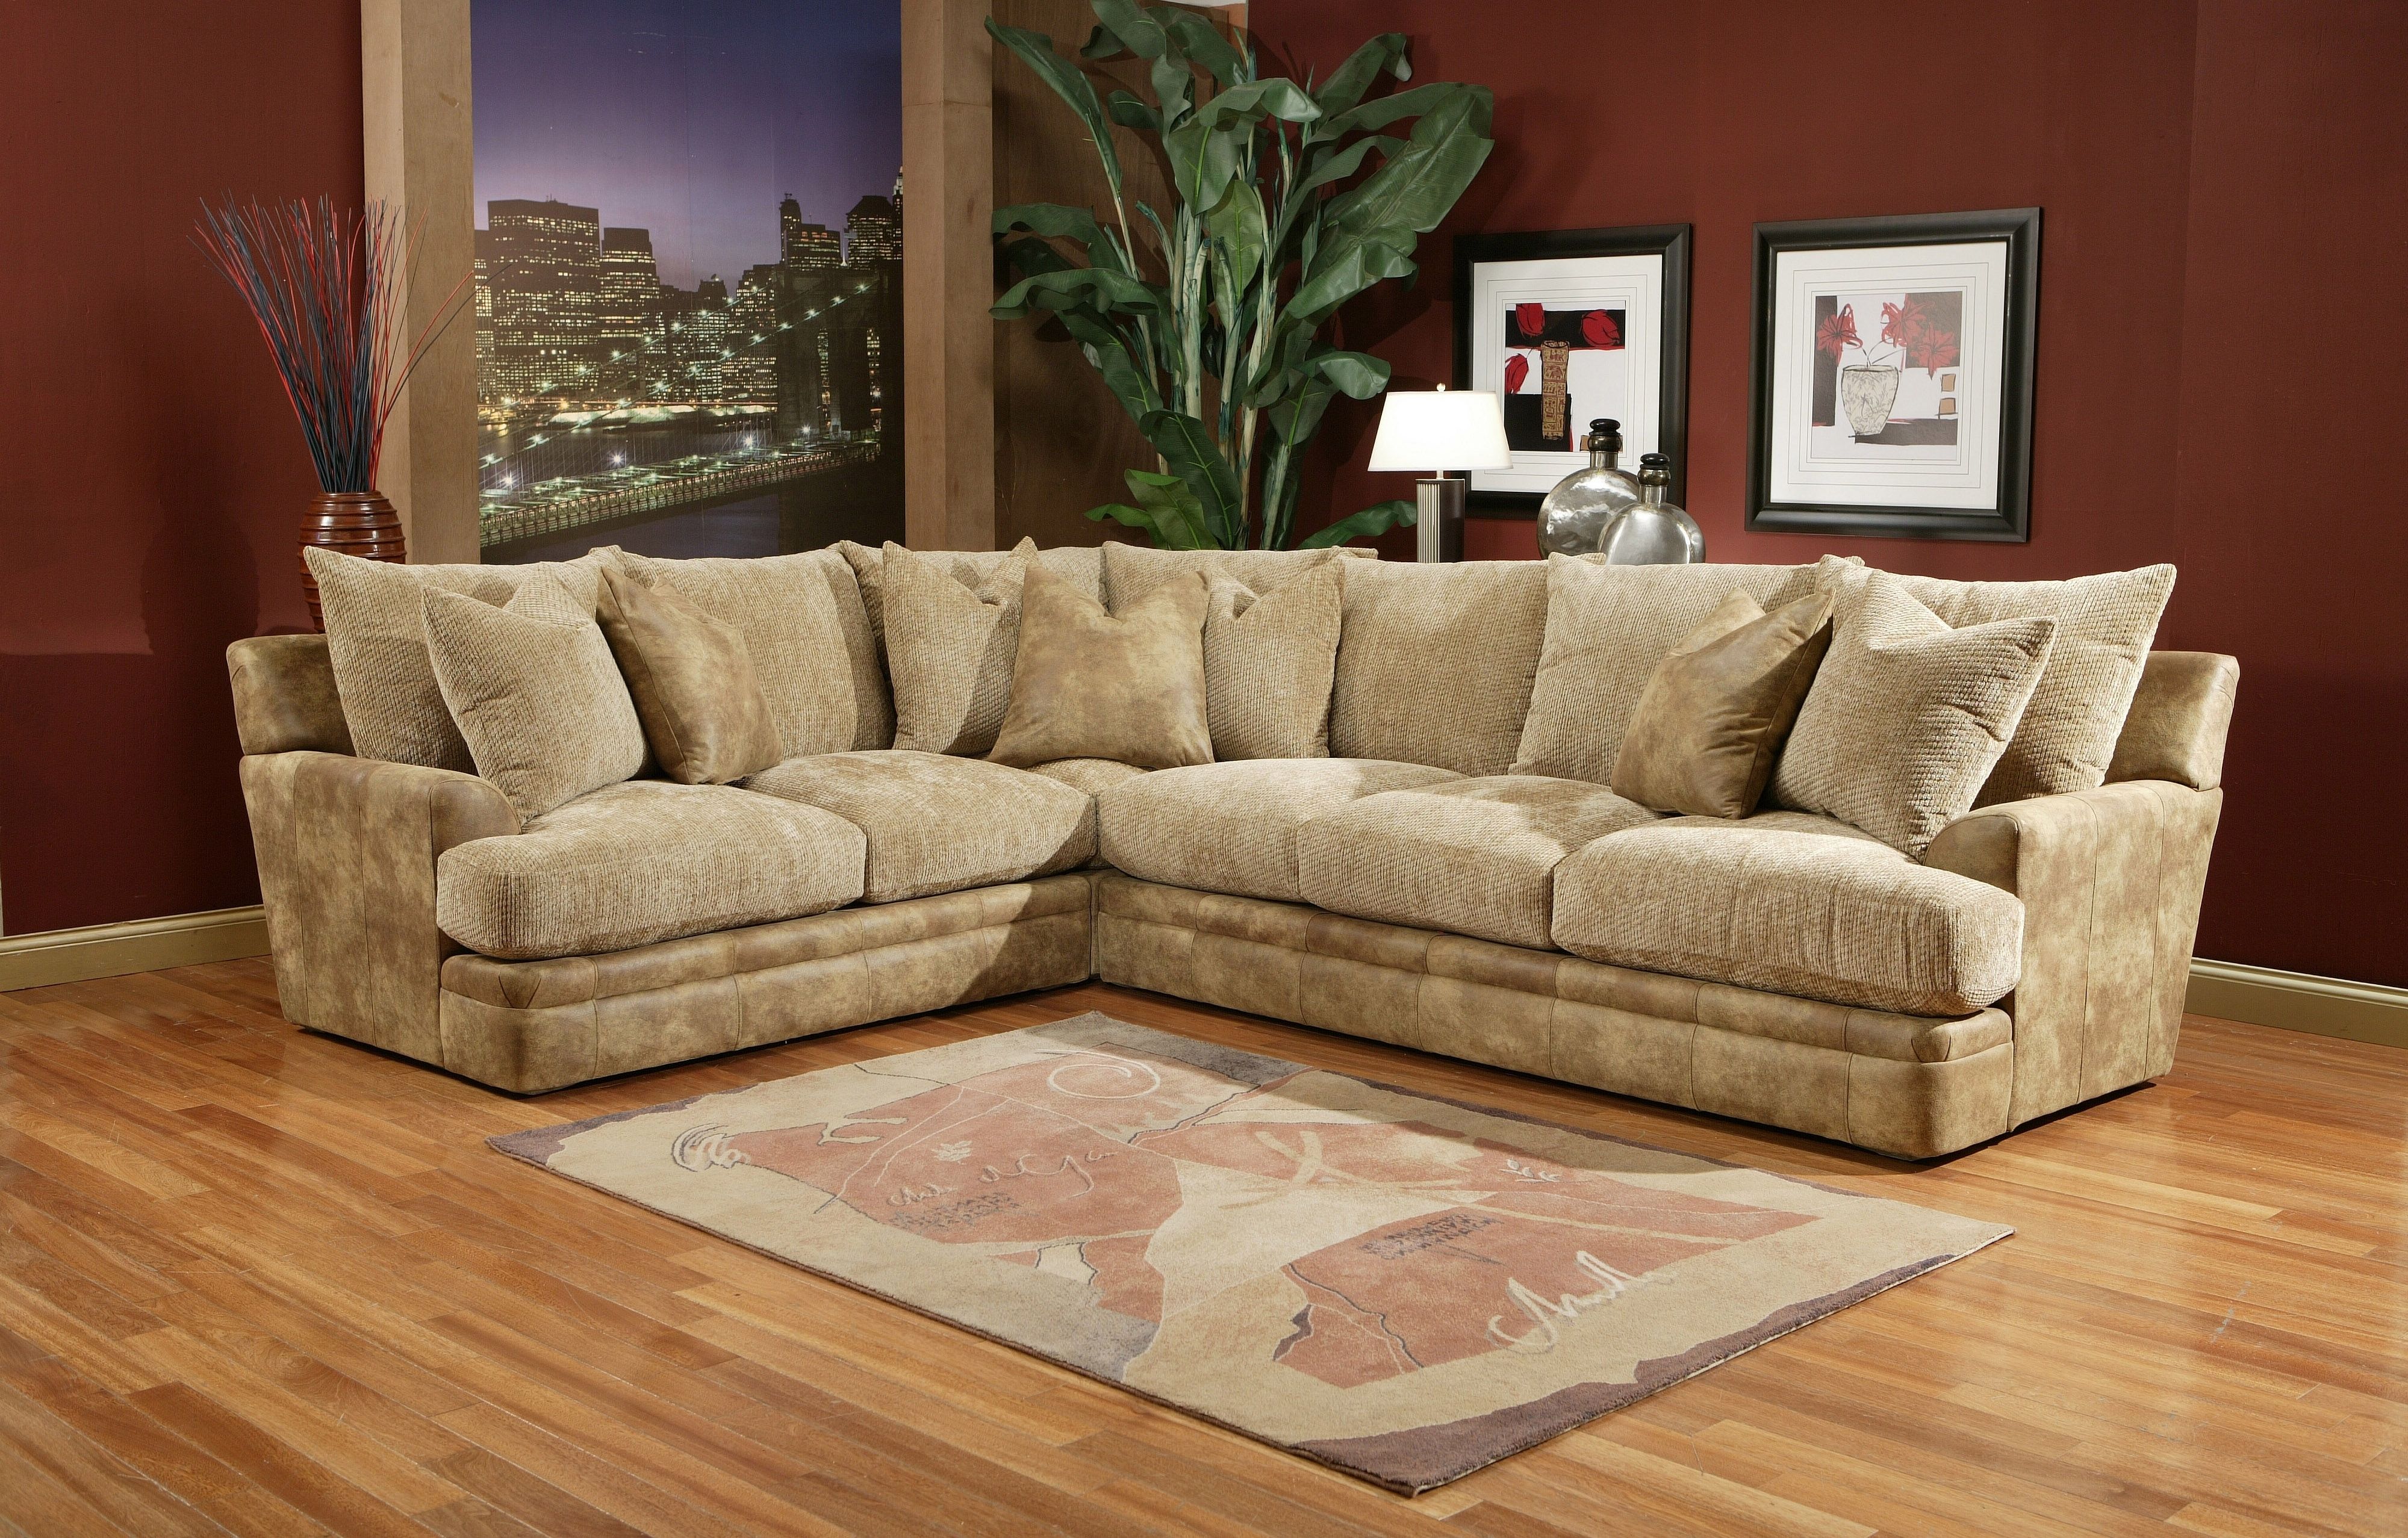 Inspirational Down Sectional Sofa 45 With Additional Modern Sofa With Regard To Down Sectional Sofas (View 4 of 10)